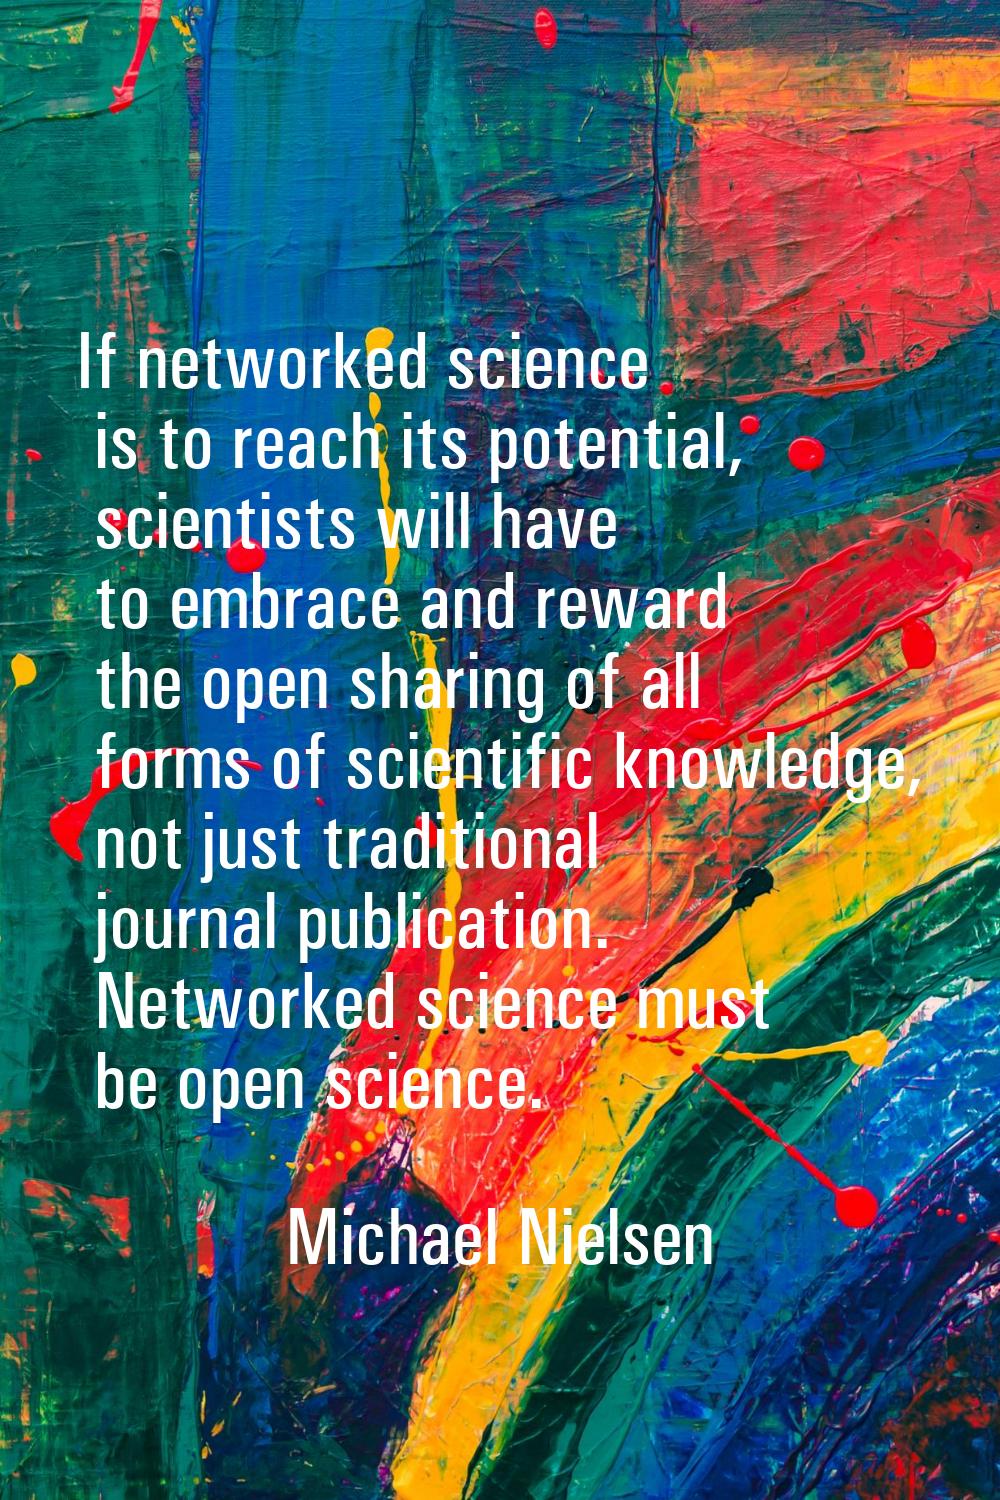 If networked science is to reach its potential, scientists will have to embrace and reward the open